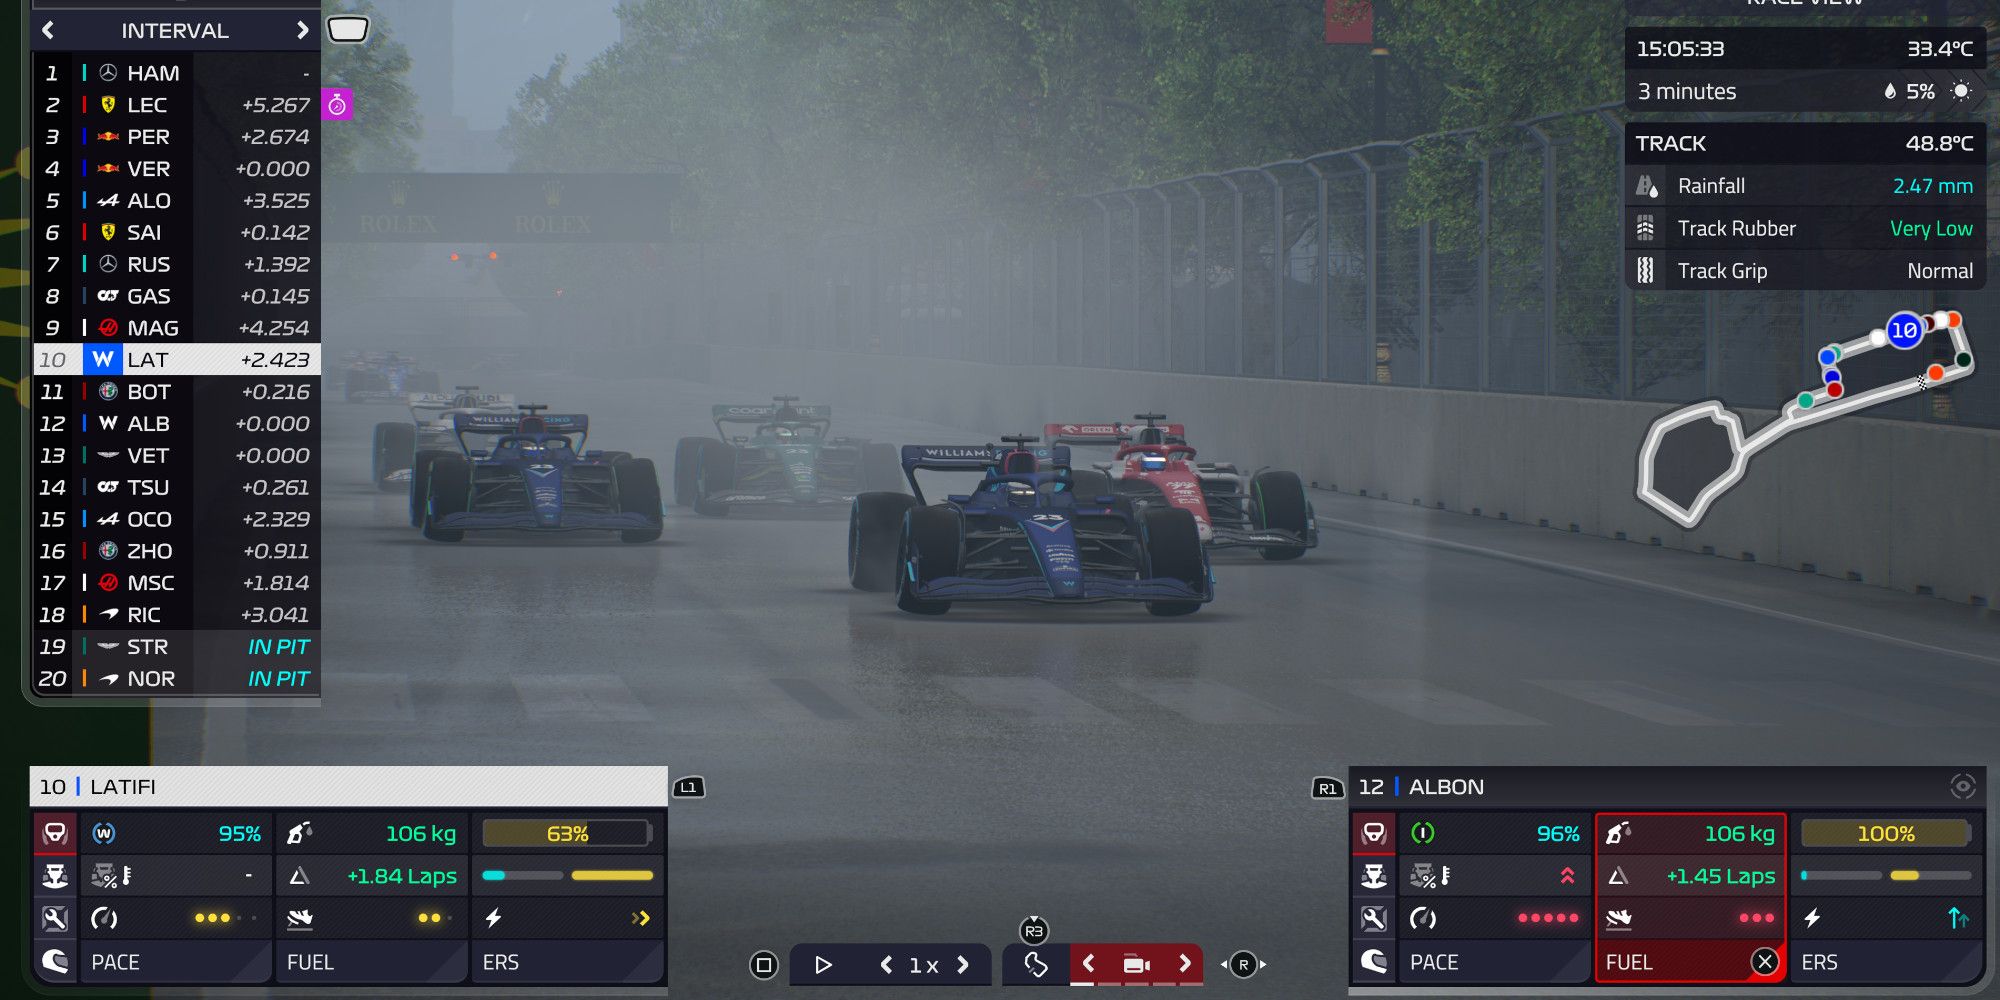 f1 manager 2022 race screen with wet weather showing the interval and commands you can give to drivers